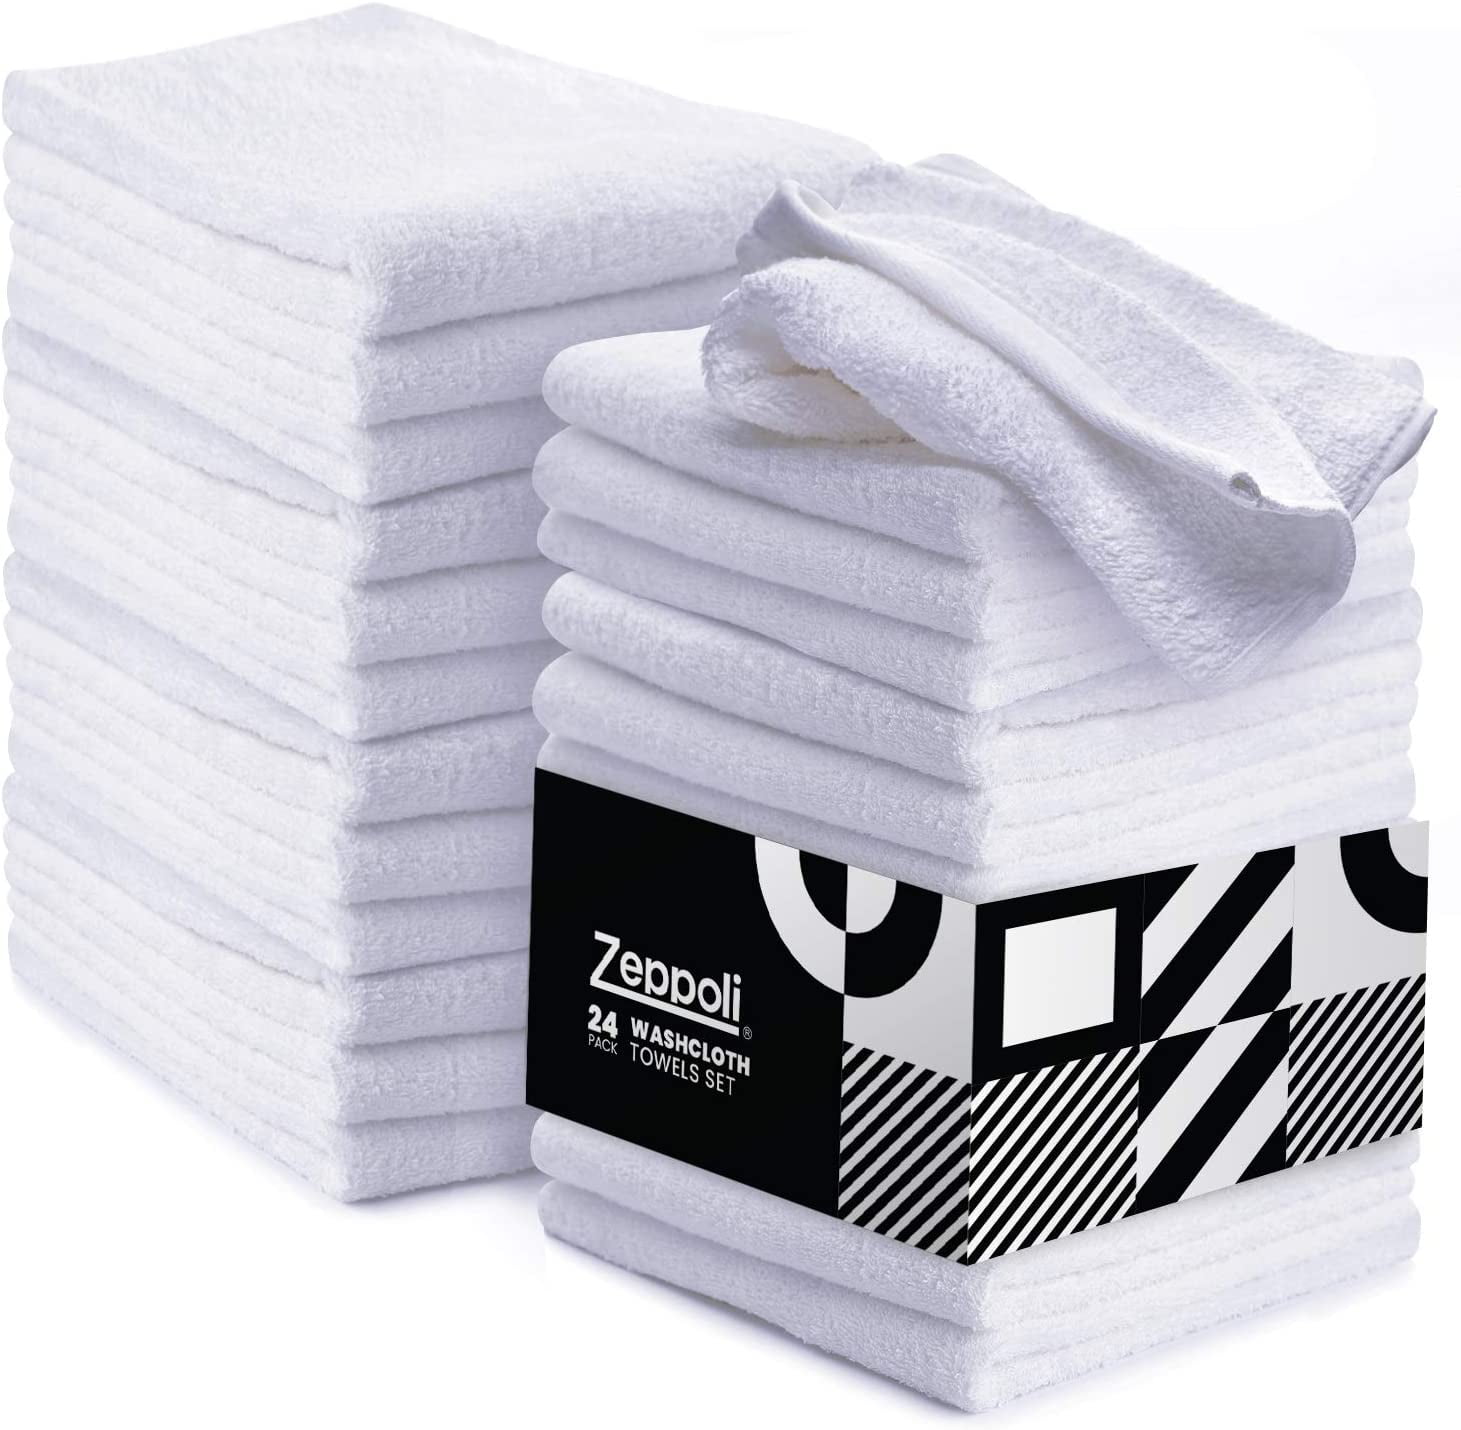 24 Pk Wash Cloth 12x12 Face/Gym/hotels & Households 100% Cotton 1 lb Quality. 